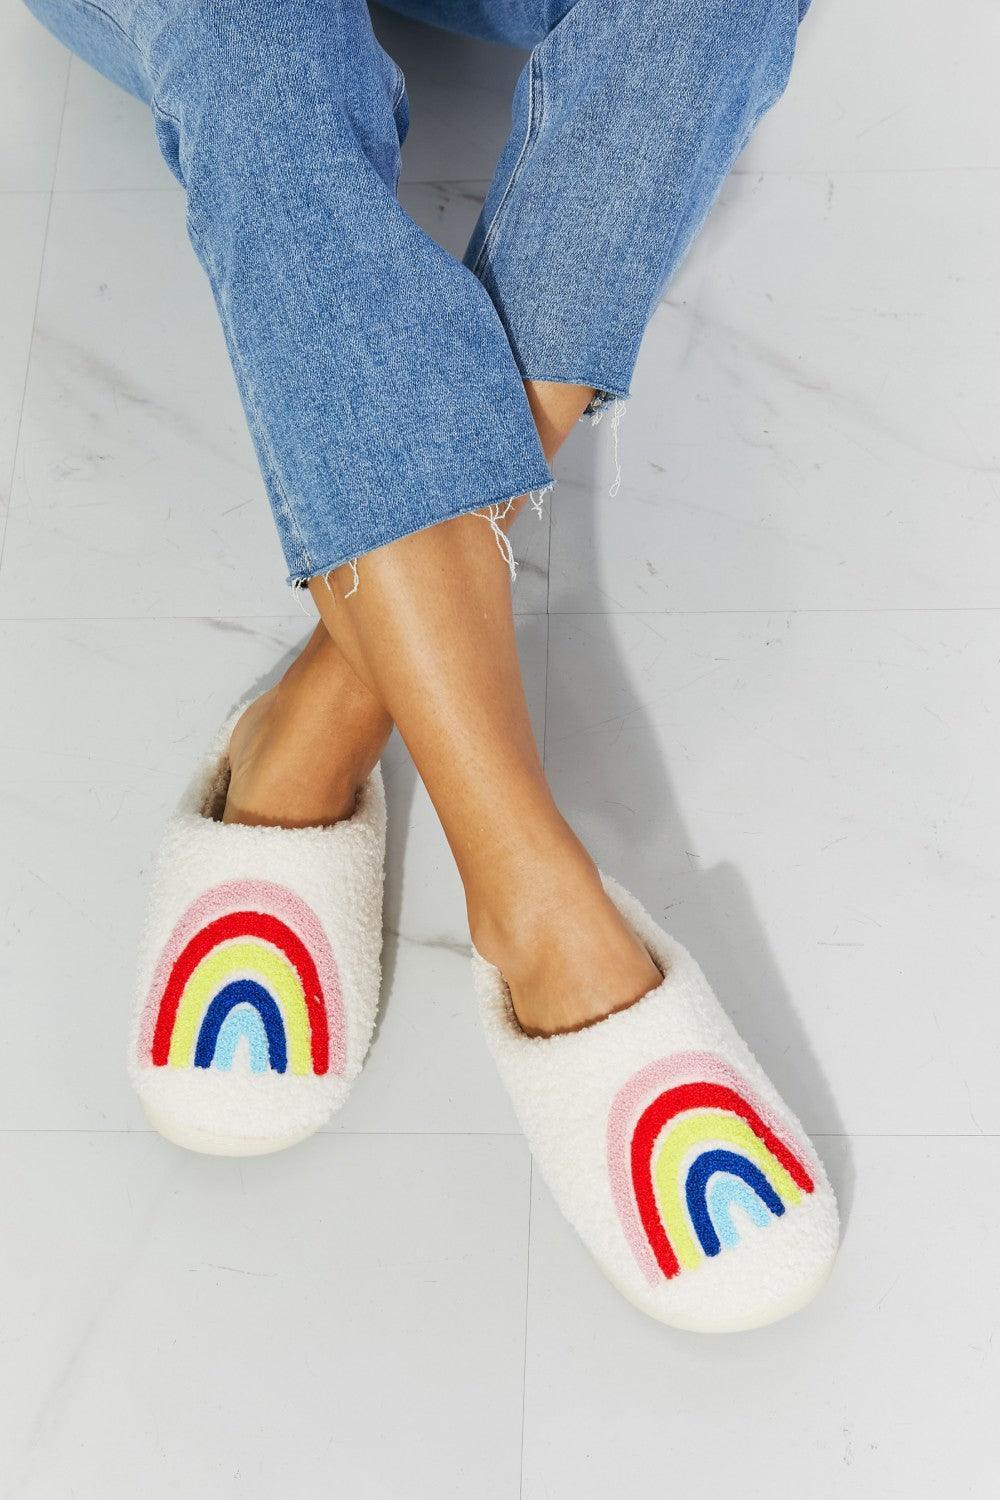 MMShoes Start A Day Rubber Sole Rainbow Plush Slippers - MXSTUDIO.COM